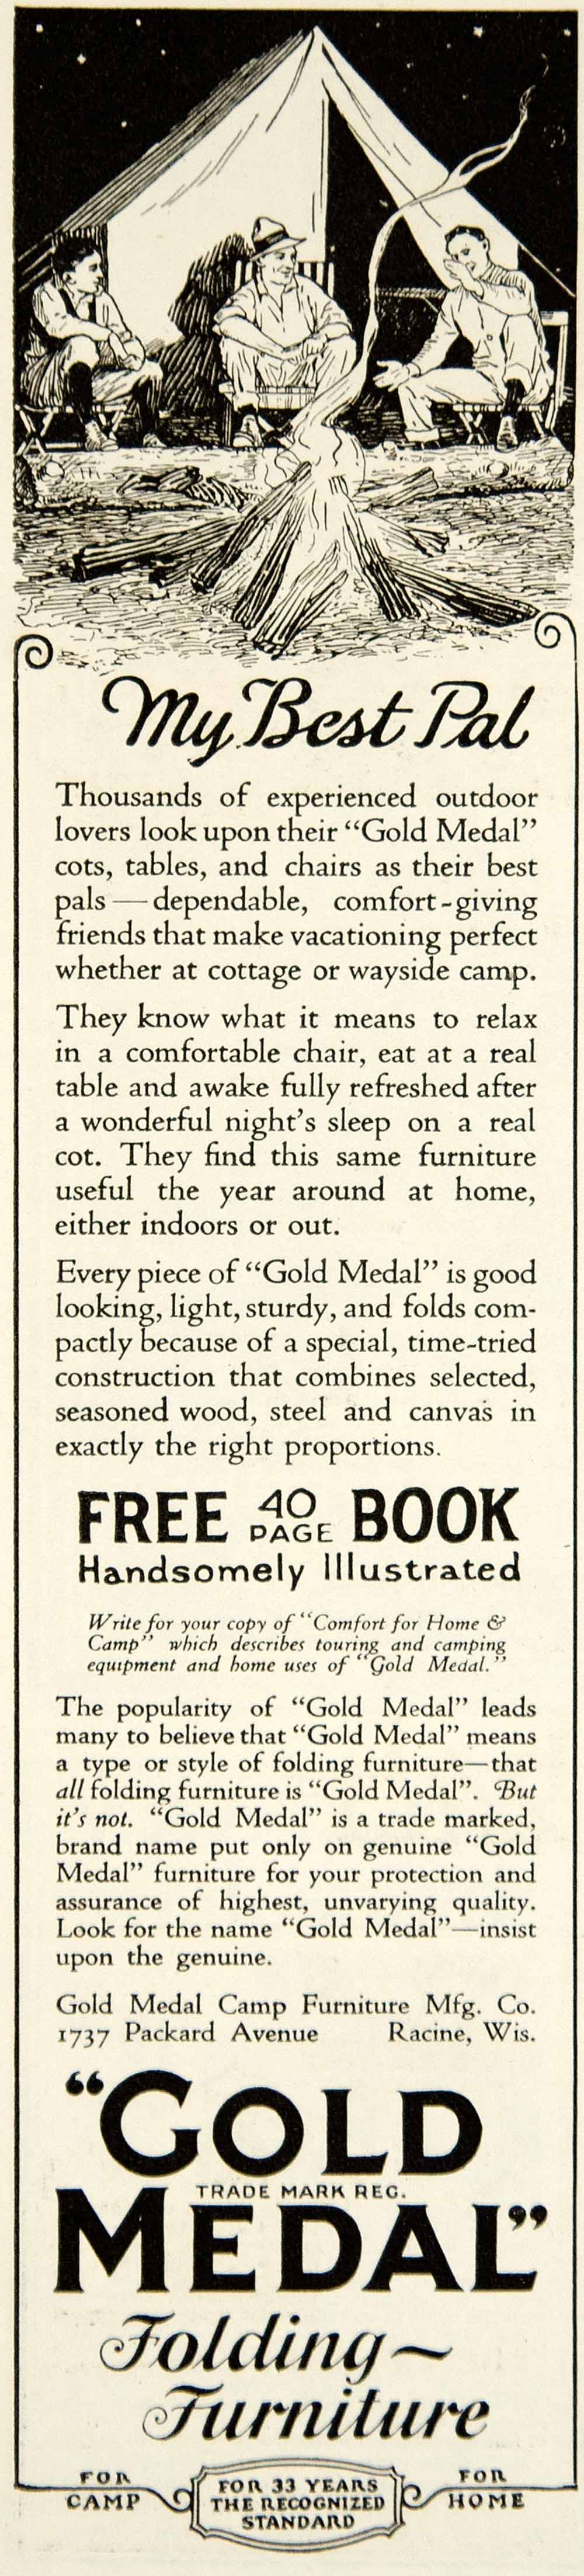 1925 Ad Gold Medal Camping Furniture 1737 Packard Ave Racine WI Sporting YOR1